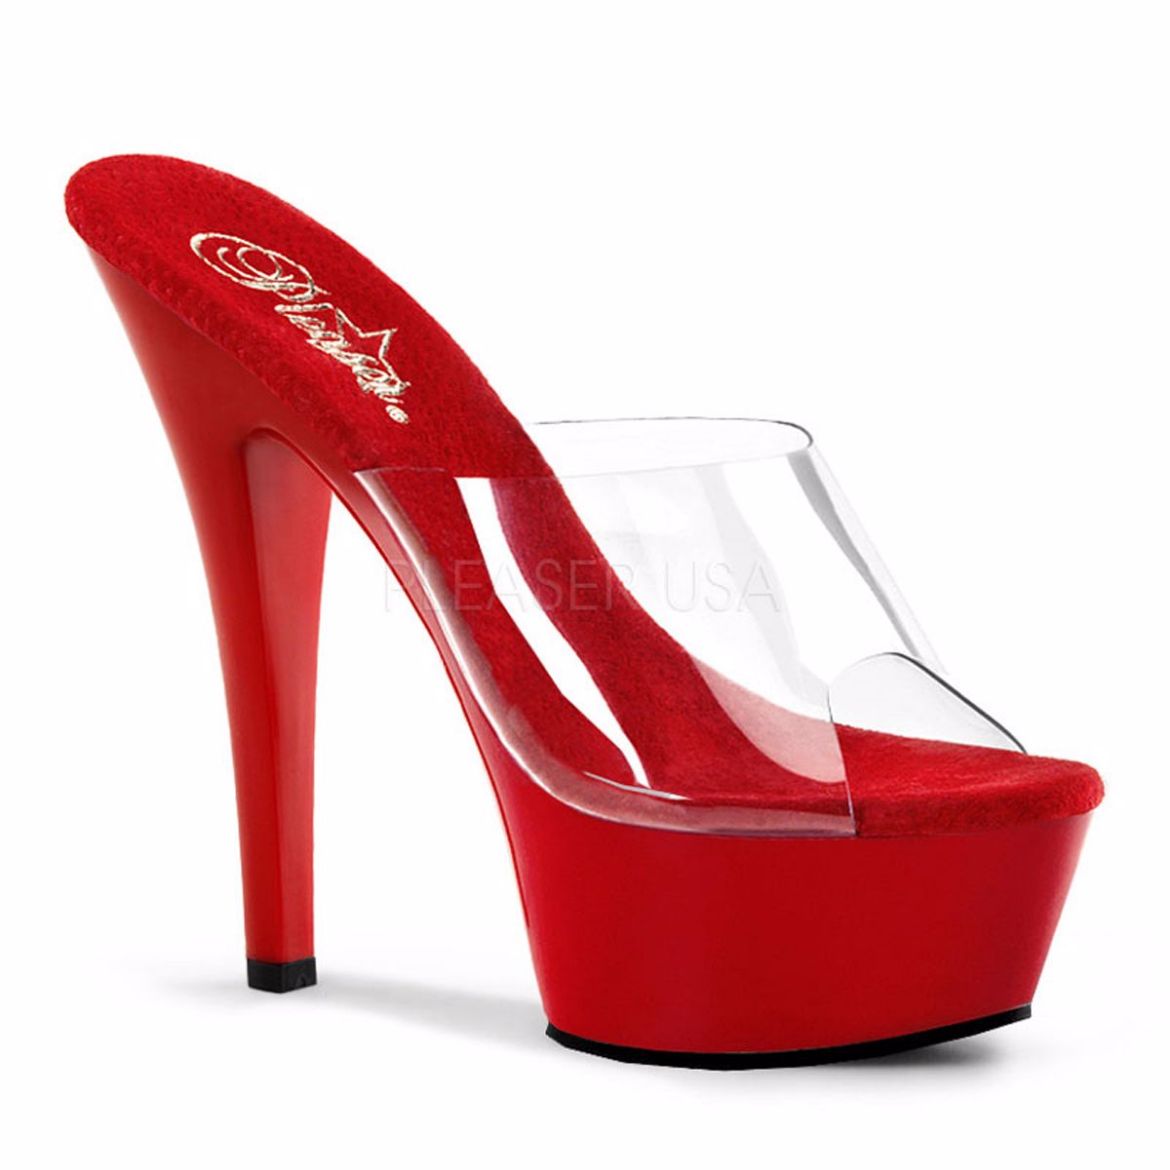 Product image of Pleaser Kiss-201 Clear/Red, 6 inch (15.2 cm) Heel, 1 3/4 inch (4.4 cm) Platform Slide Mule Shoes